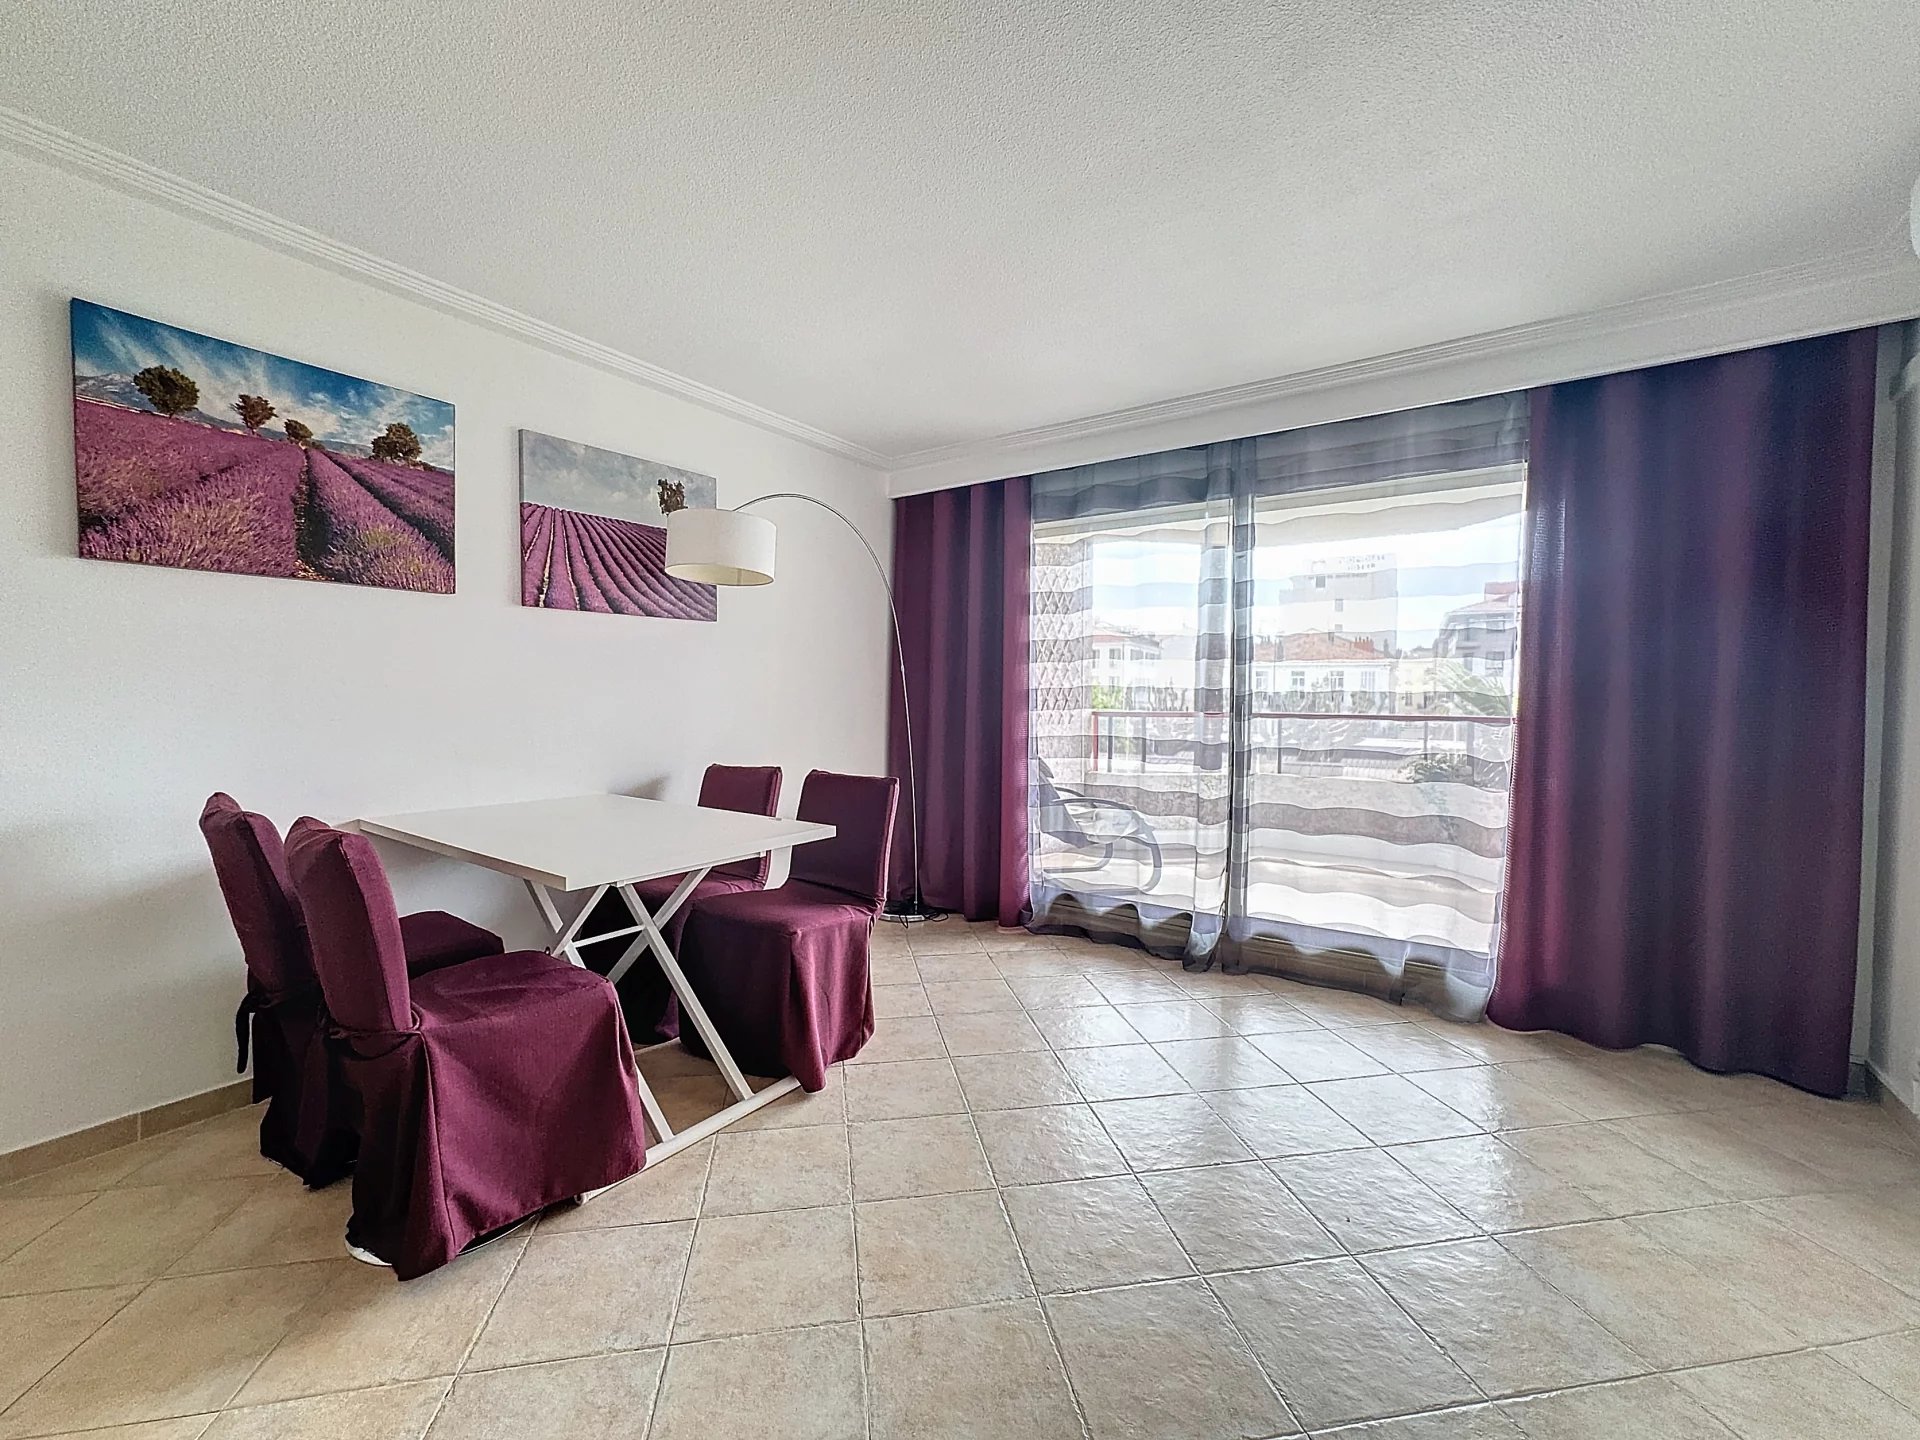 1 bedroom Apartment / Cannes / Banane